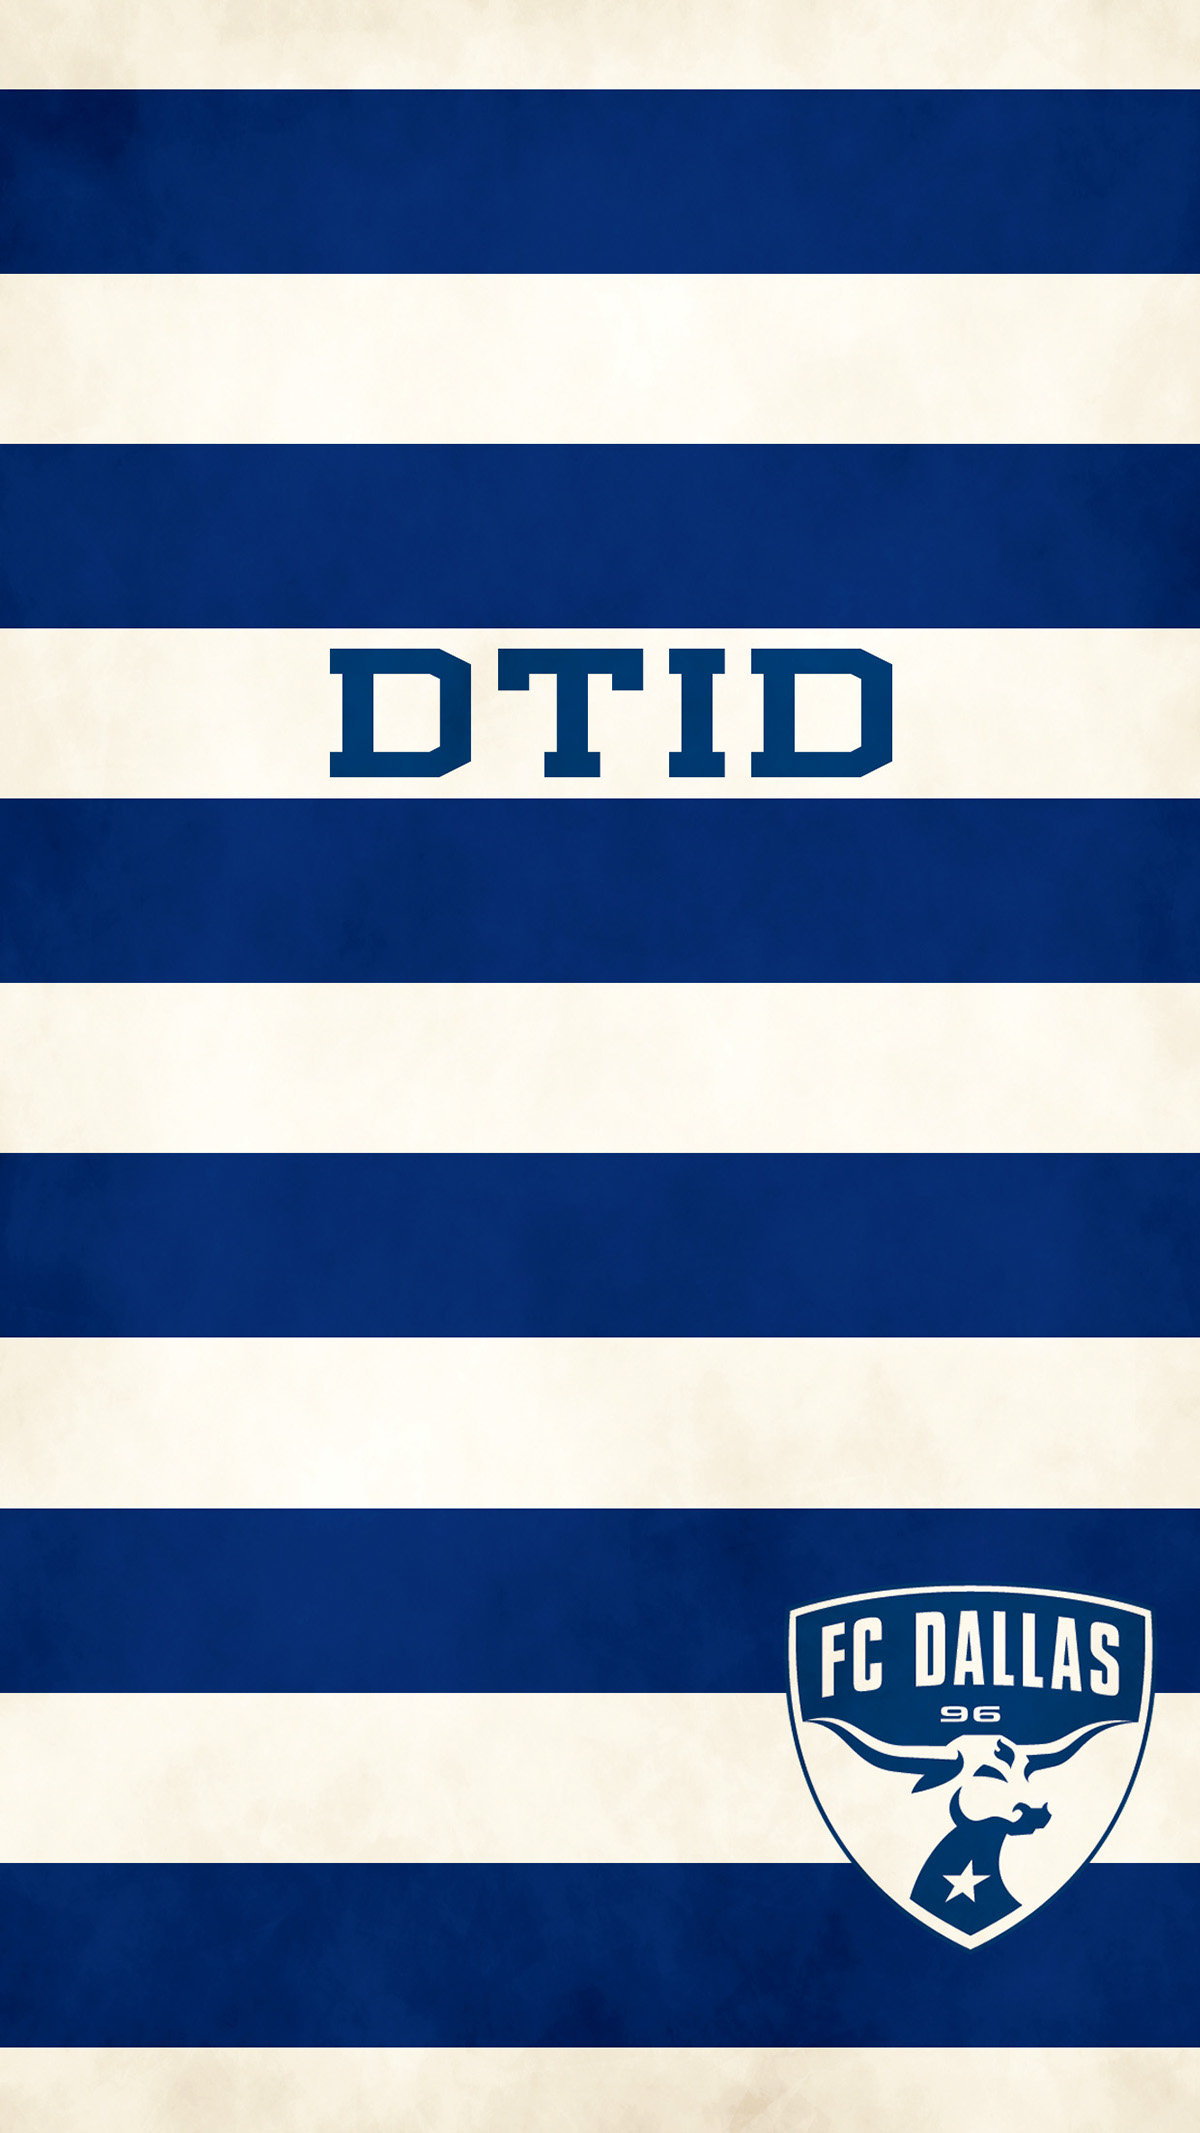 2015 FC Dallas Wallpapers on Behance